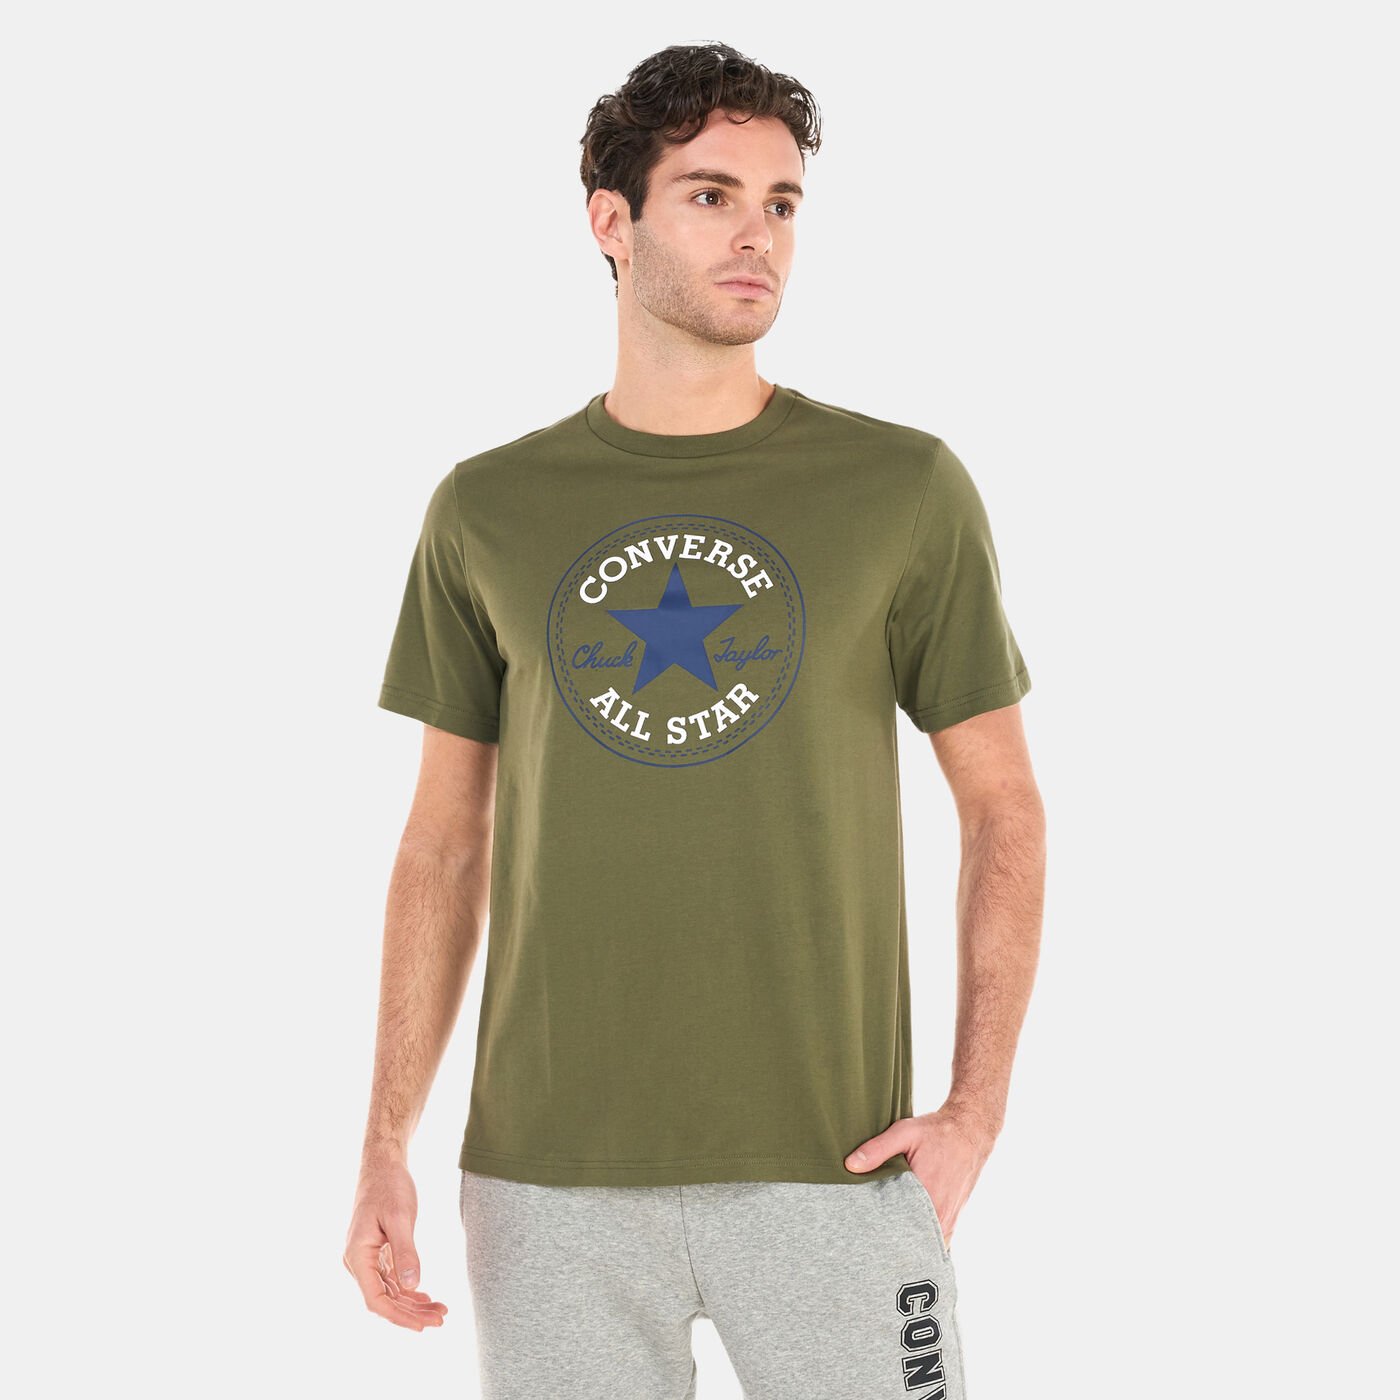 Men's Go-To All Star Patch T-Shirt